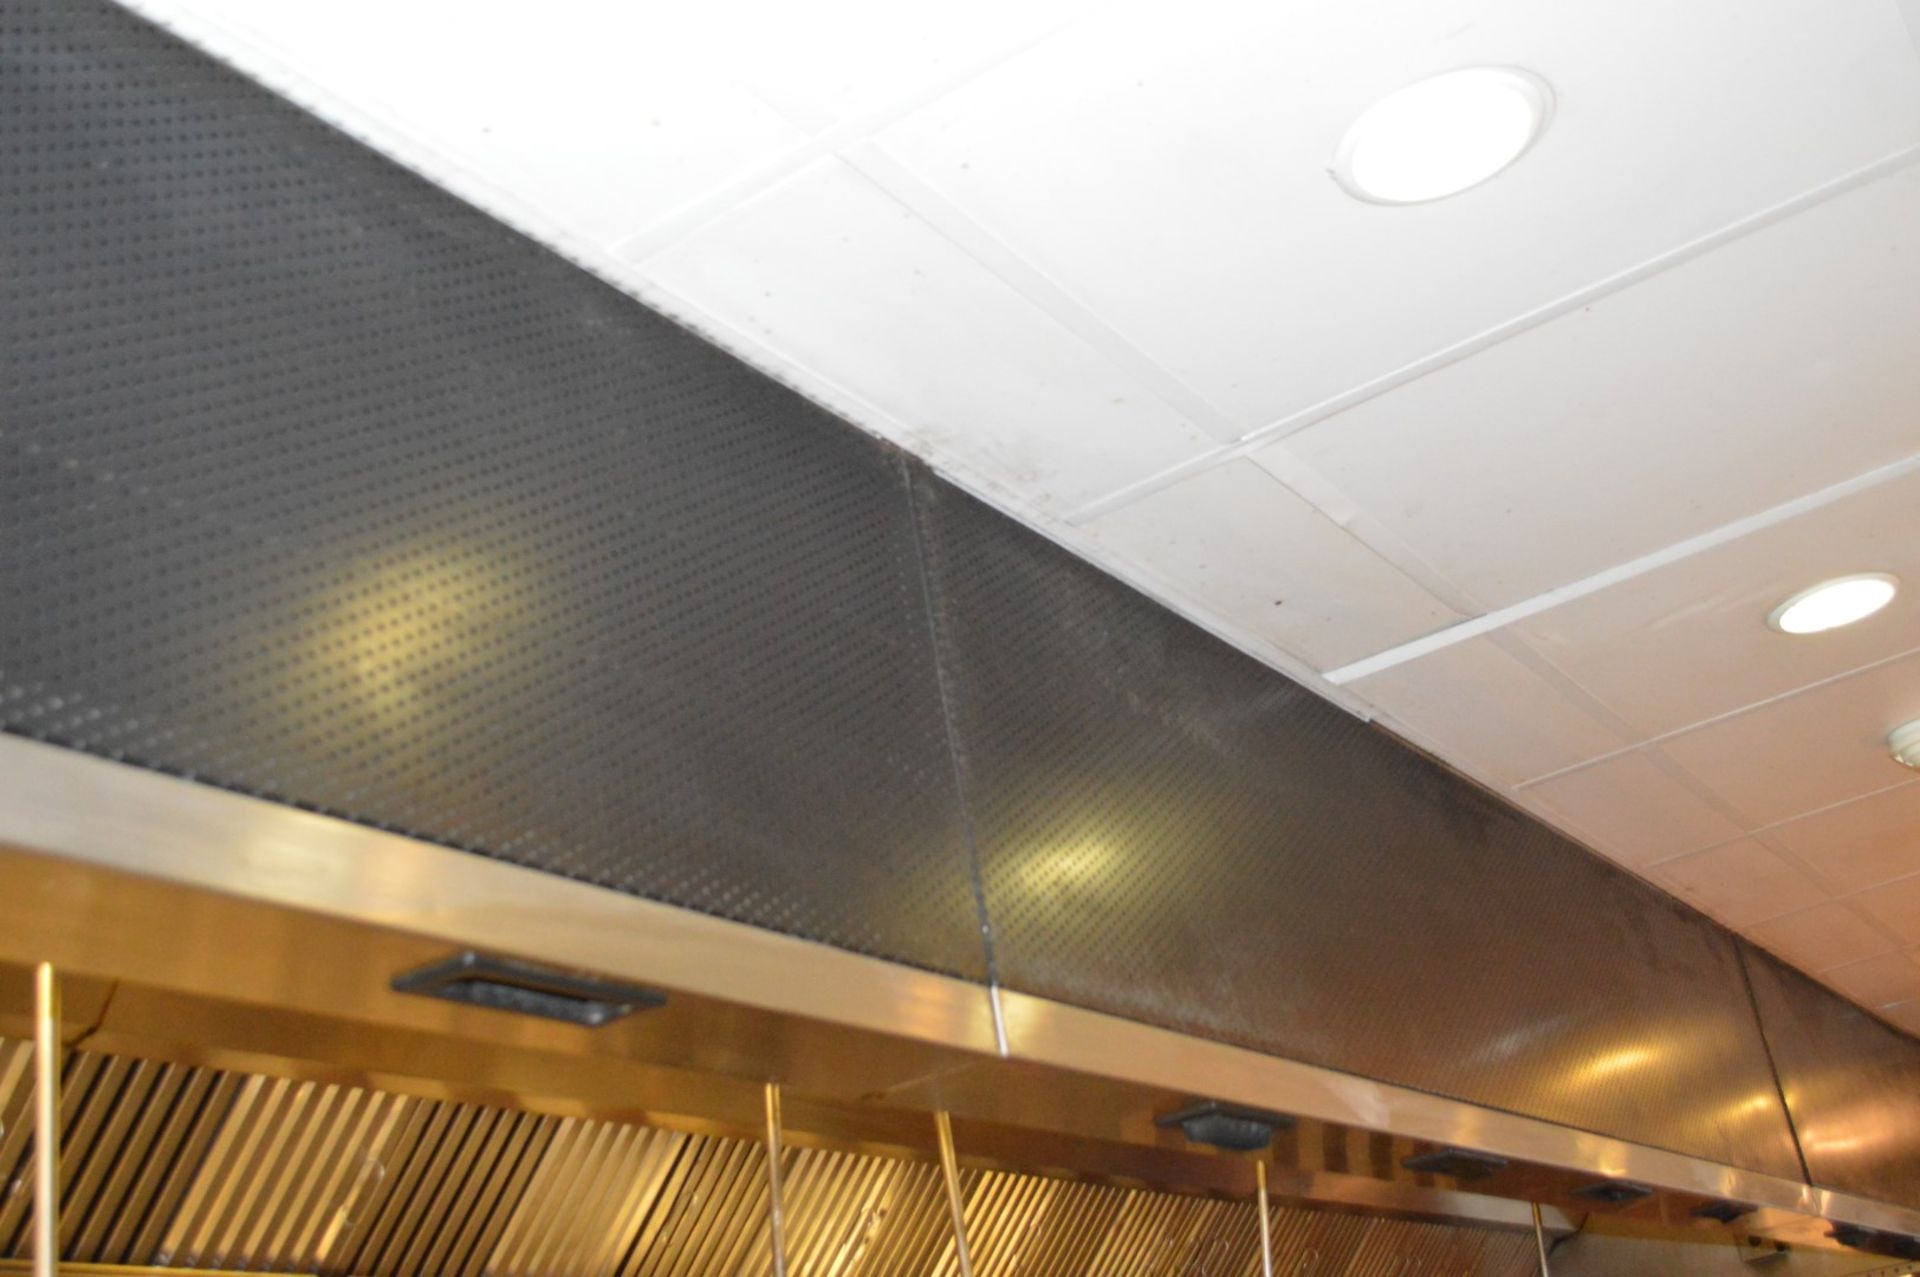 1 x Commercial Stainless Steel Kitchen Extractor Canopy With Ansul R-102 Fire Suppression System - - Image 9 of 13